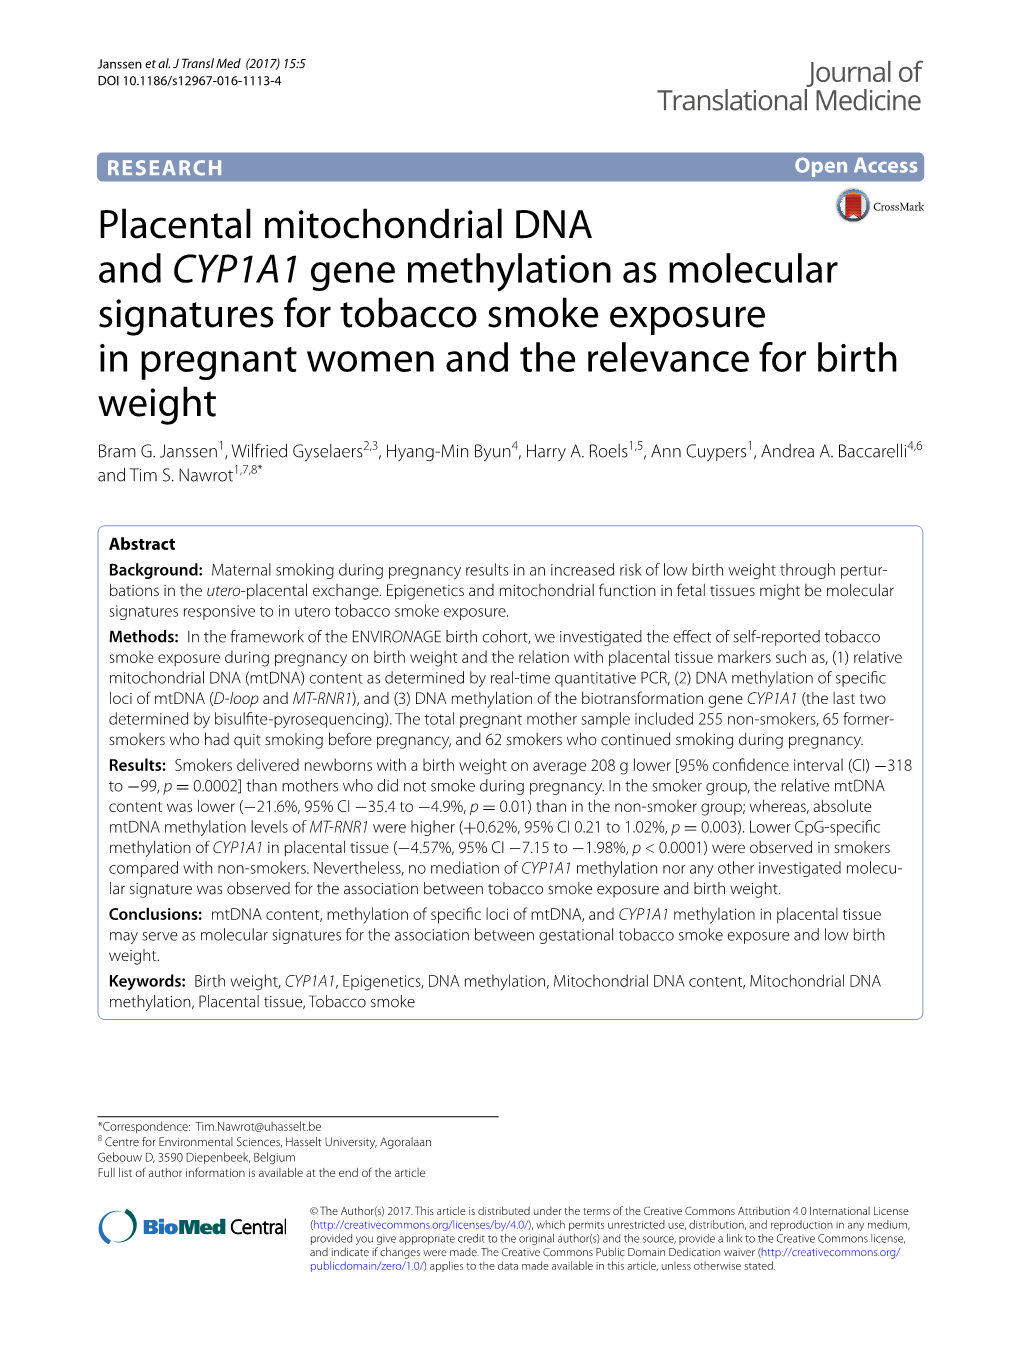 Placental Mitochondrial DNA and CYP1A1 Gene Methylation As Molecular Signatures for Tobacco Smoke Exposure in Pregnant Women and the Relevance for Birth Weight Bram G